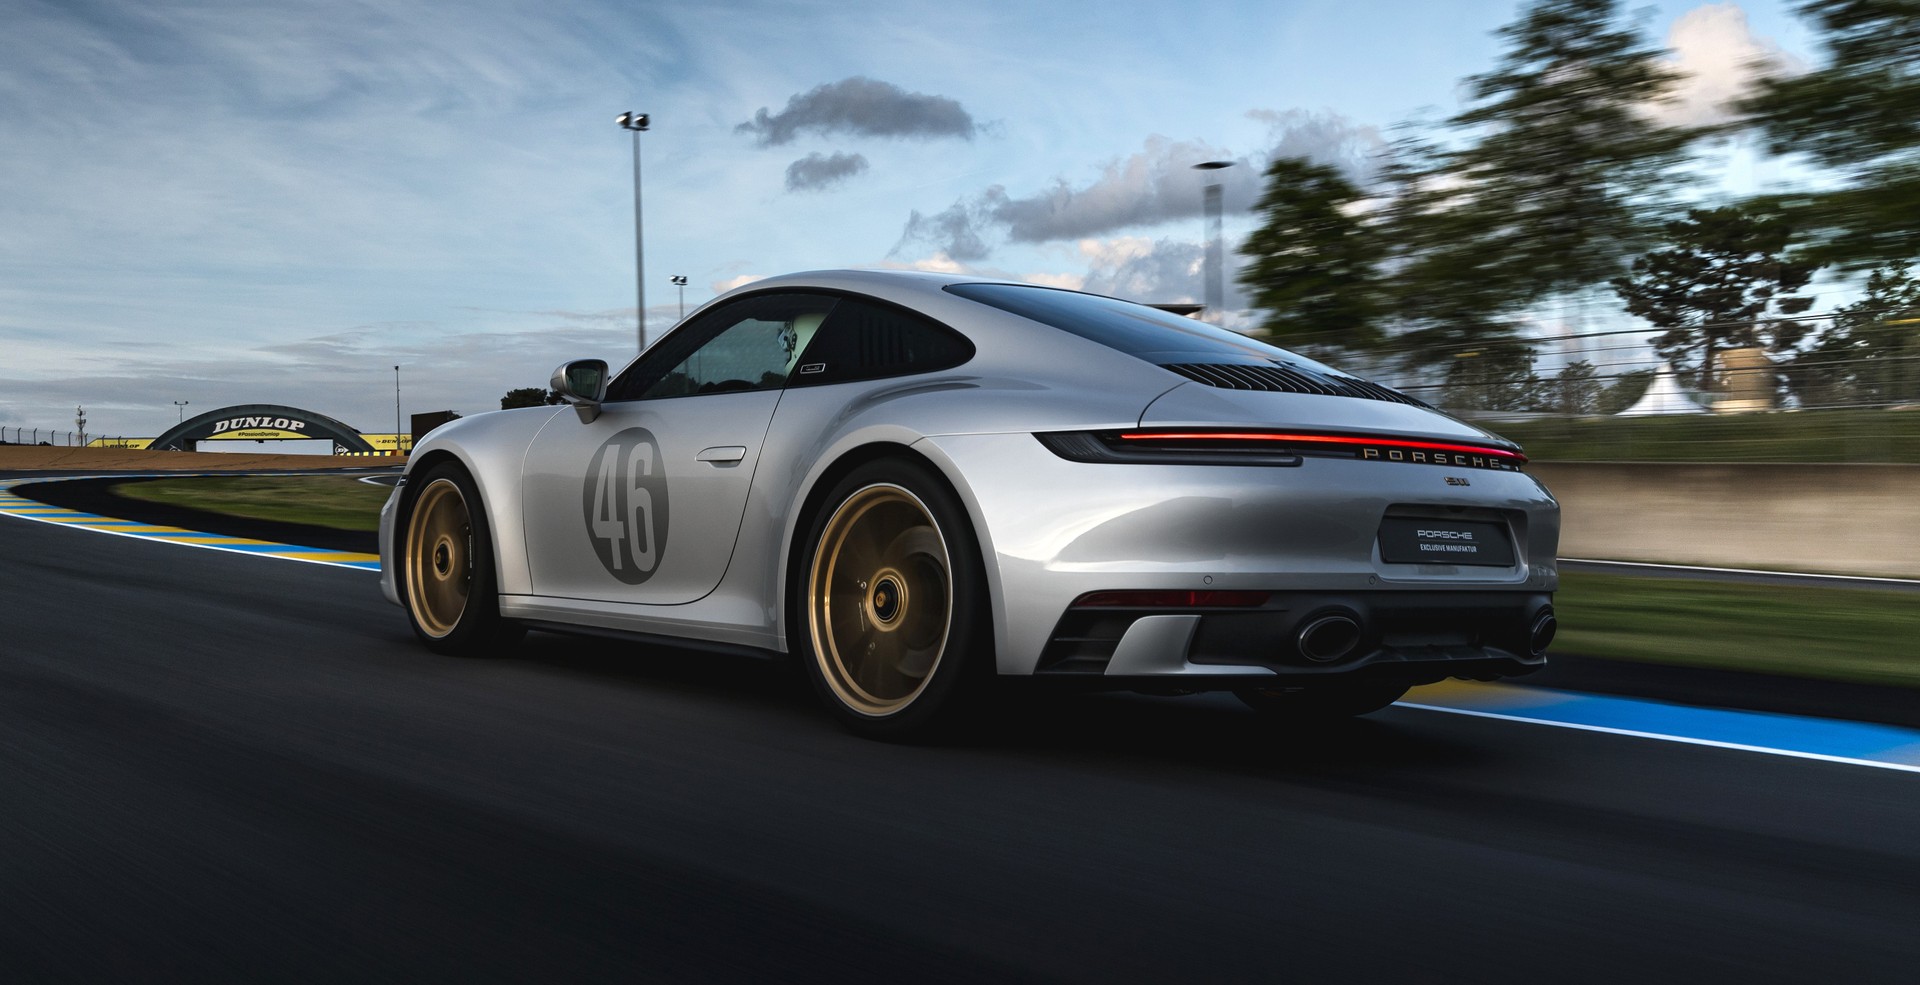 Porsche 911 GTS, a special edition celebrating the 100th anniversary of the 24 Hours of Le Mans